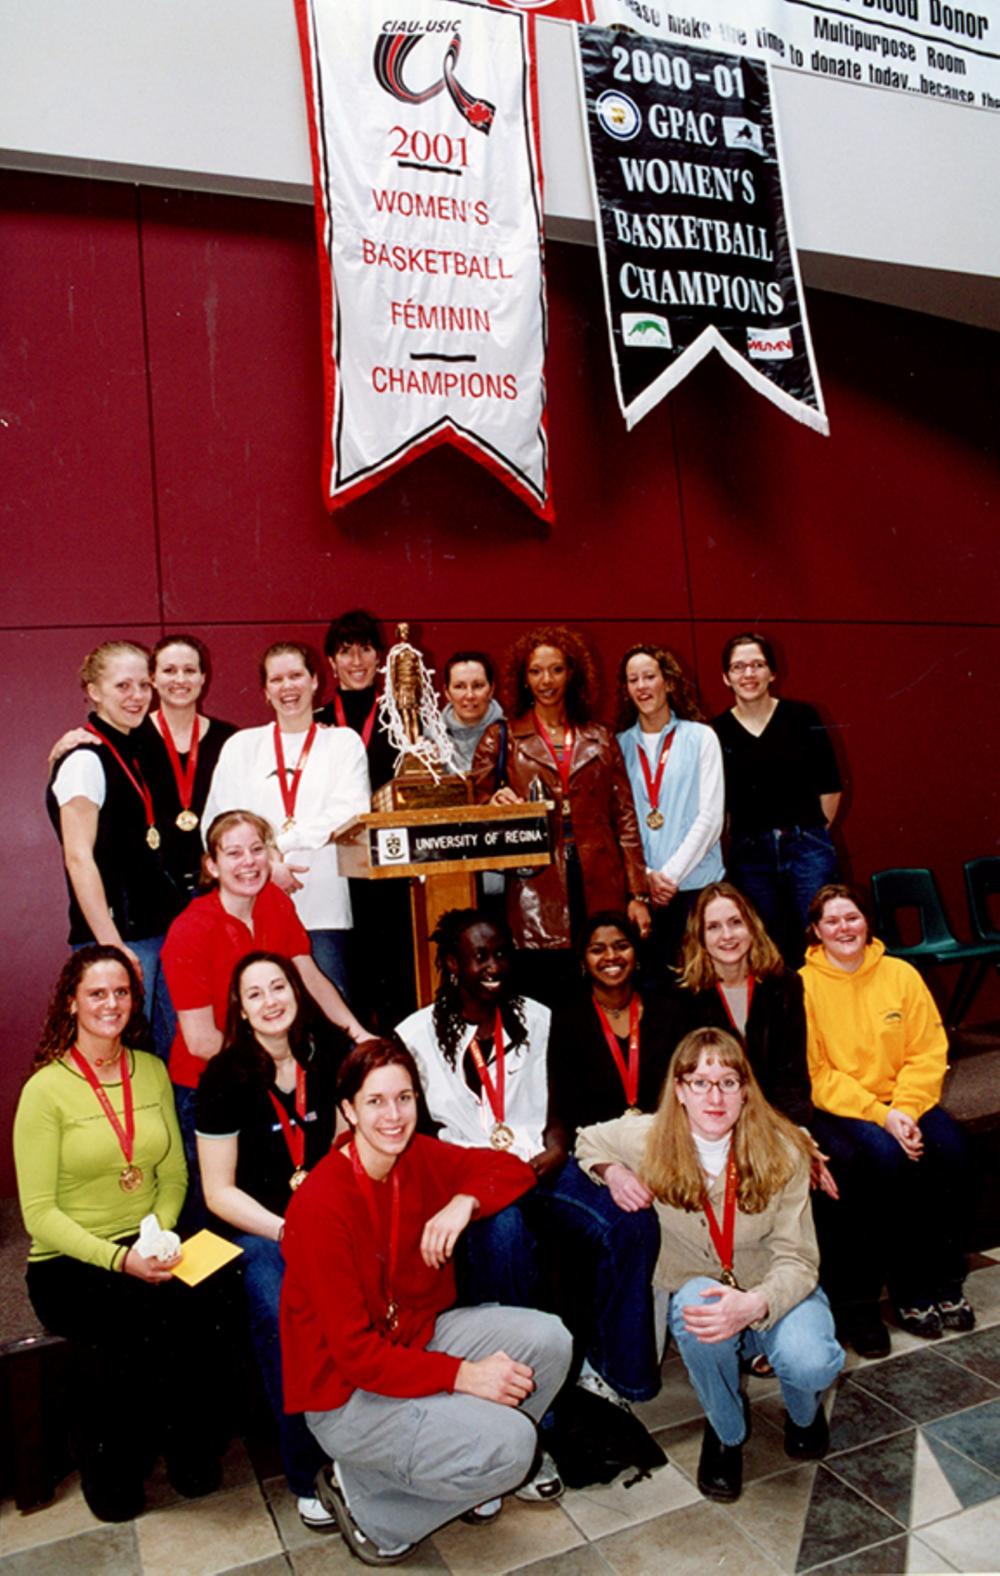 Women’s basketball team posing with trophy, medals, and winning banners.